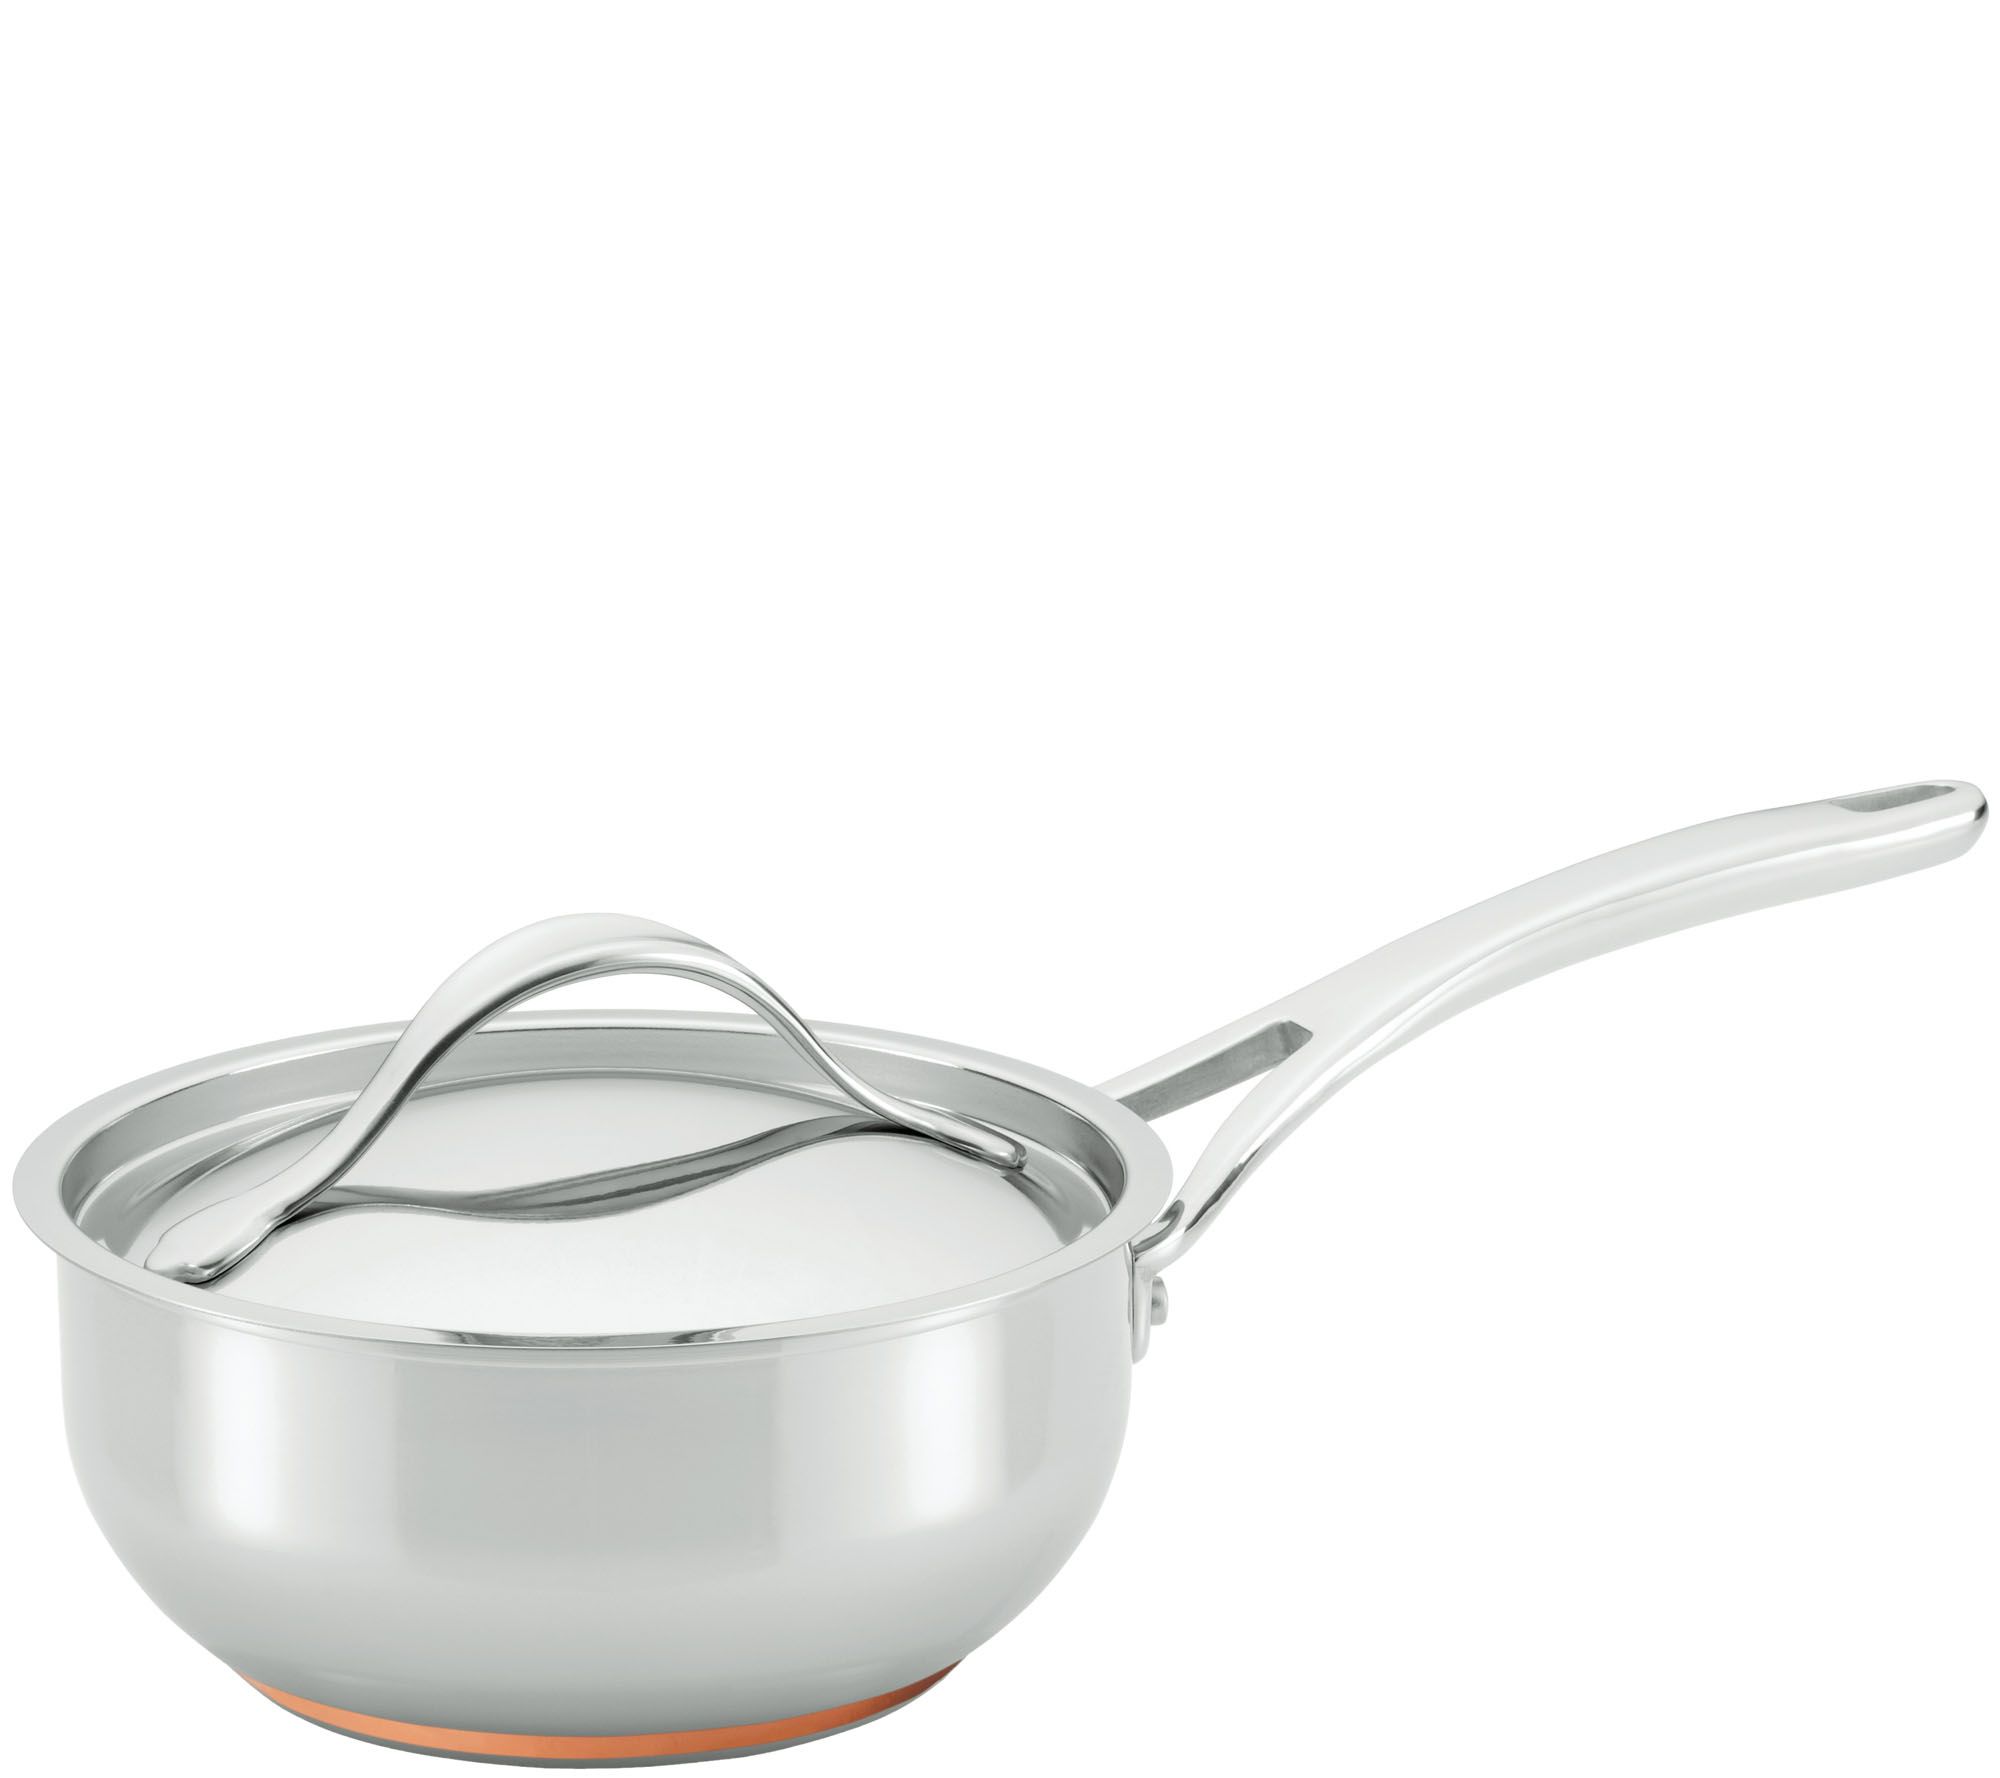 Anolon Nouvelle Copper Stainless Steel 12-Inch Covered French